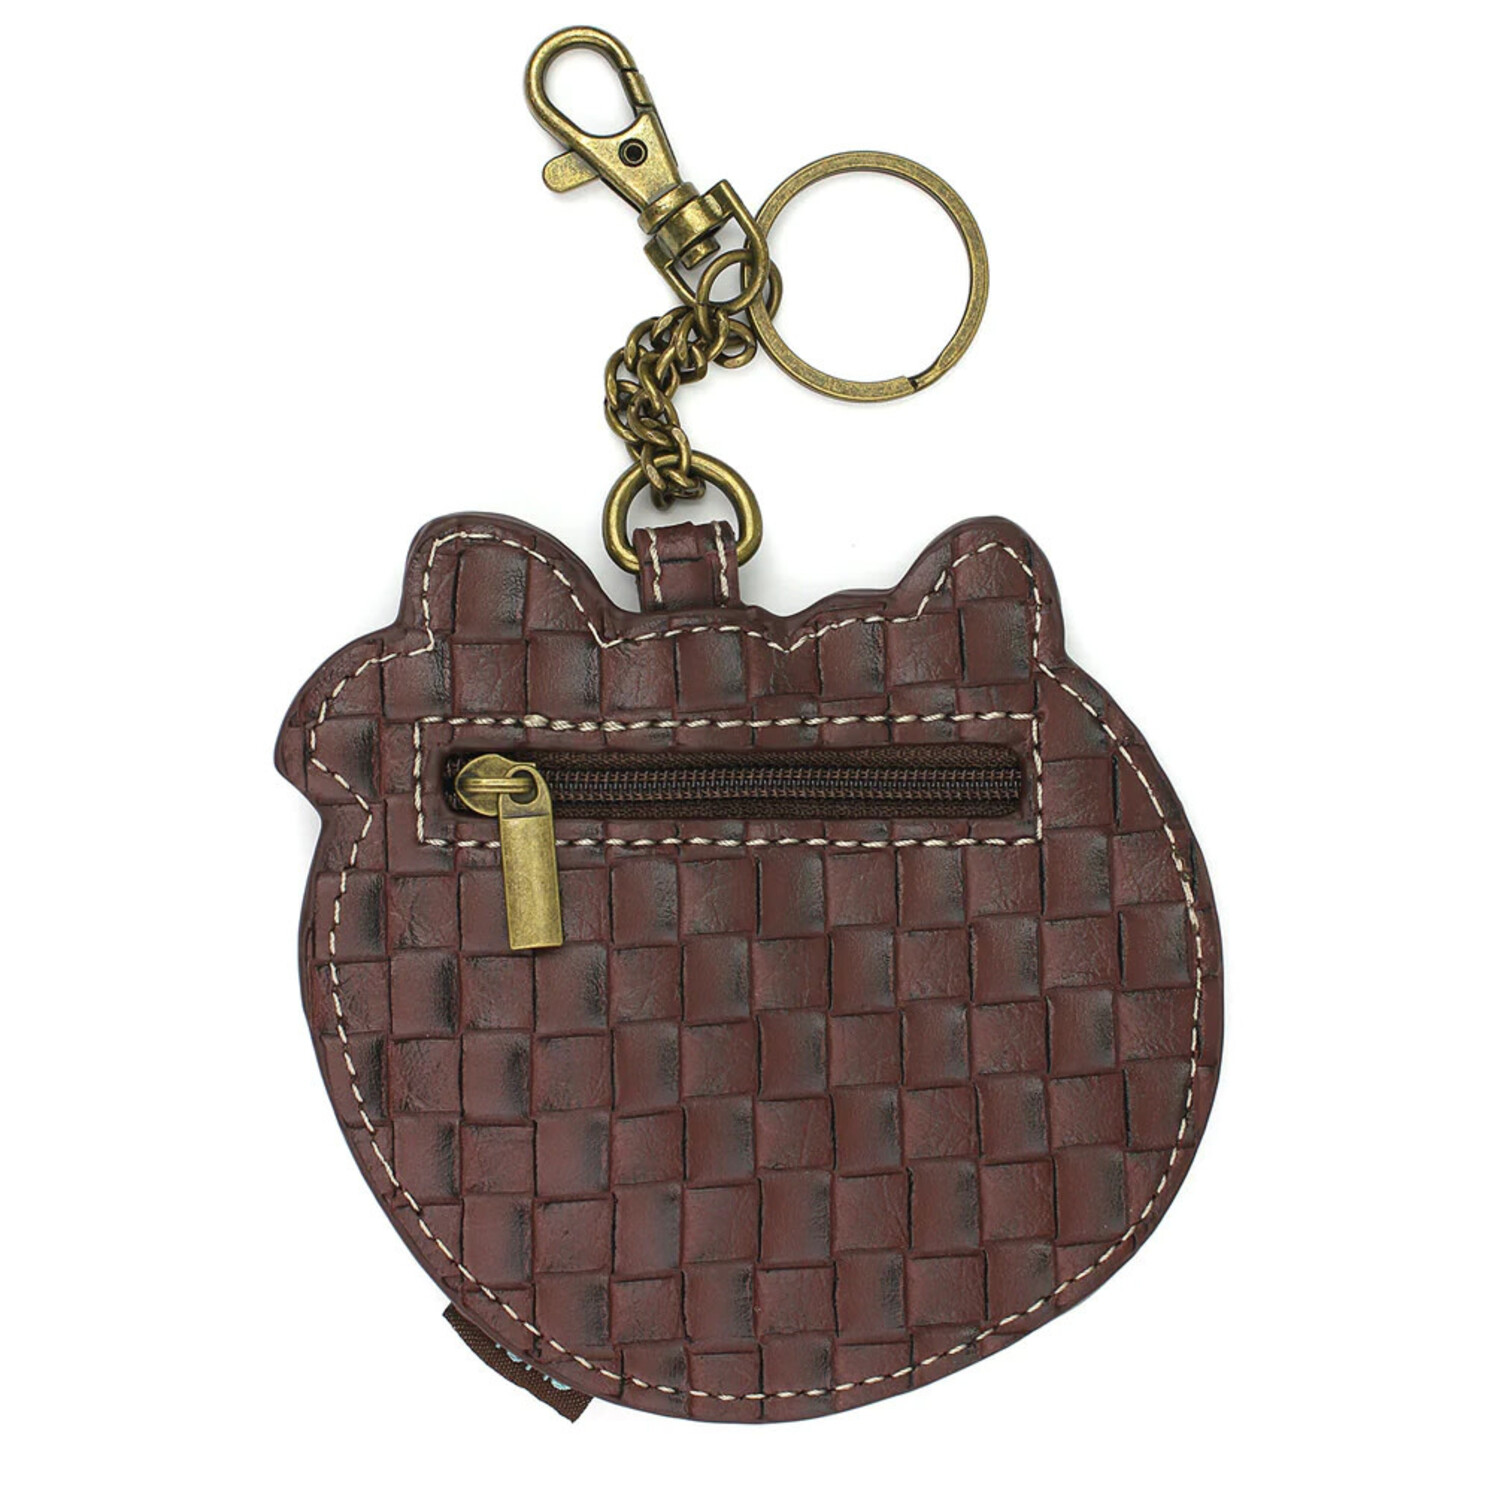 Lv coin wallet keychain, Women's Fashion, Bags & Wallets, Purses